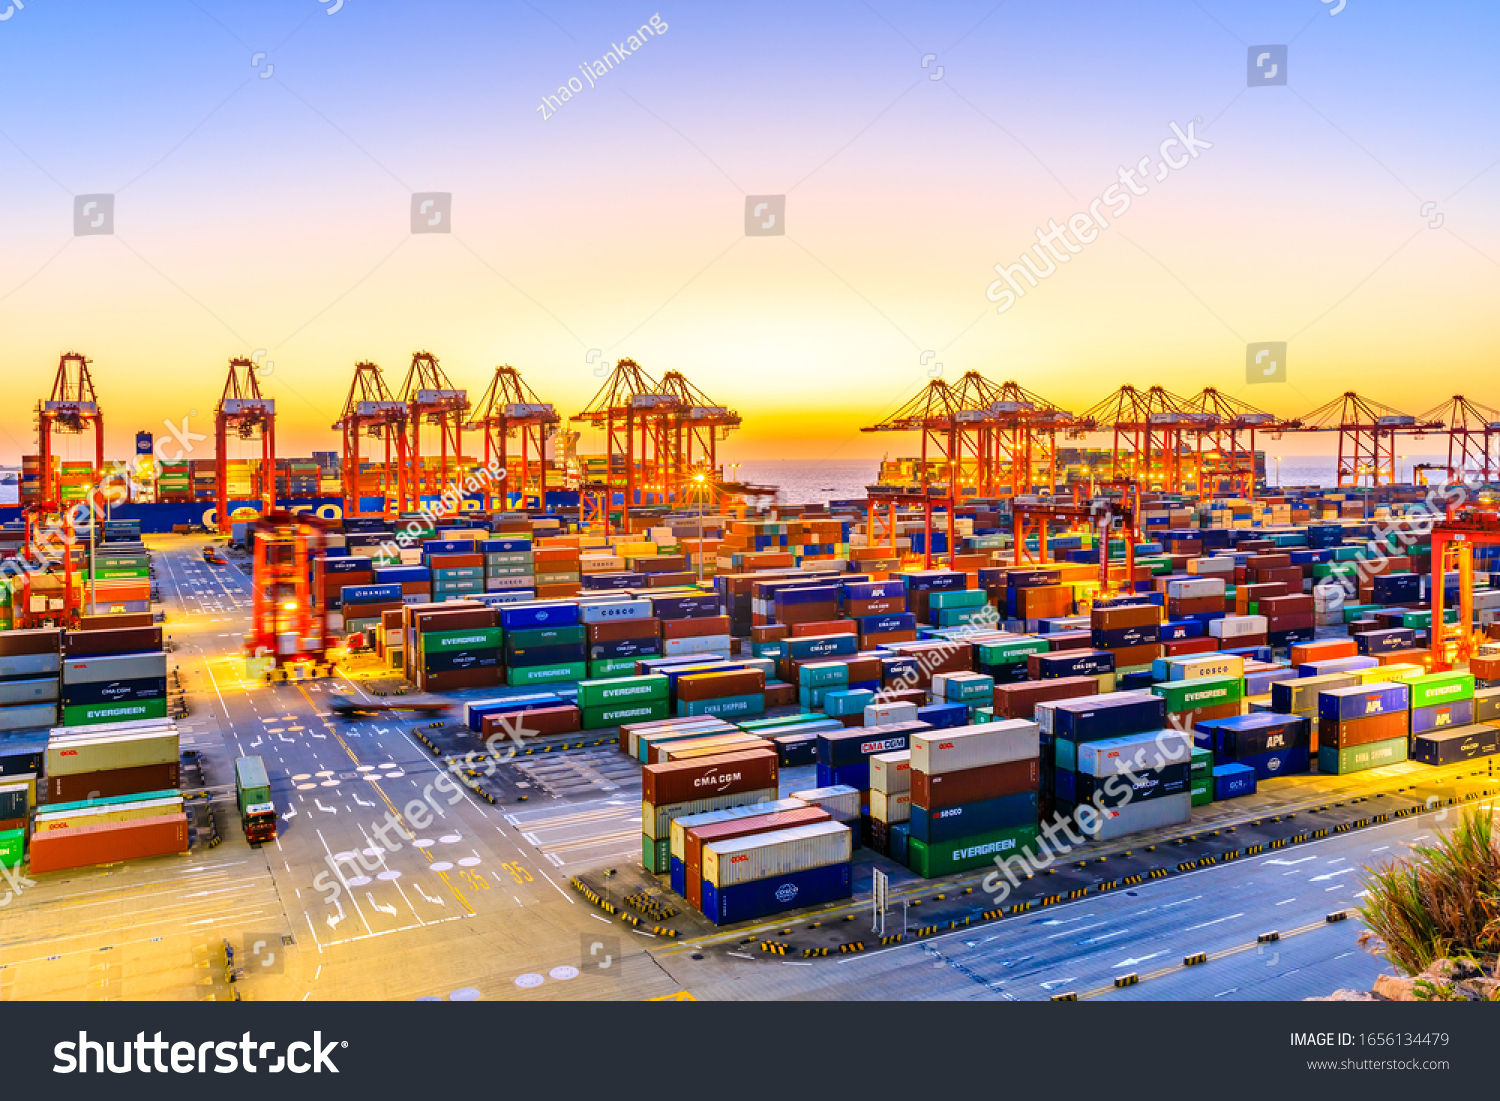 Shanghai,China - November 15,2019:Shanghai Yangshan Deepwater Port Container Cargo Terminal,Shanghai has become one of the world's largest container port. #1656134479